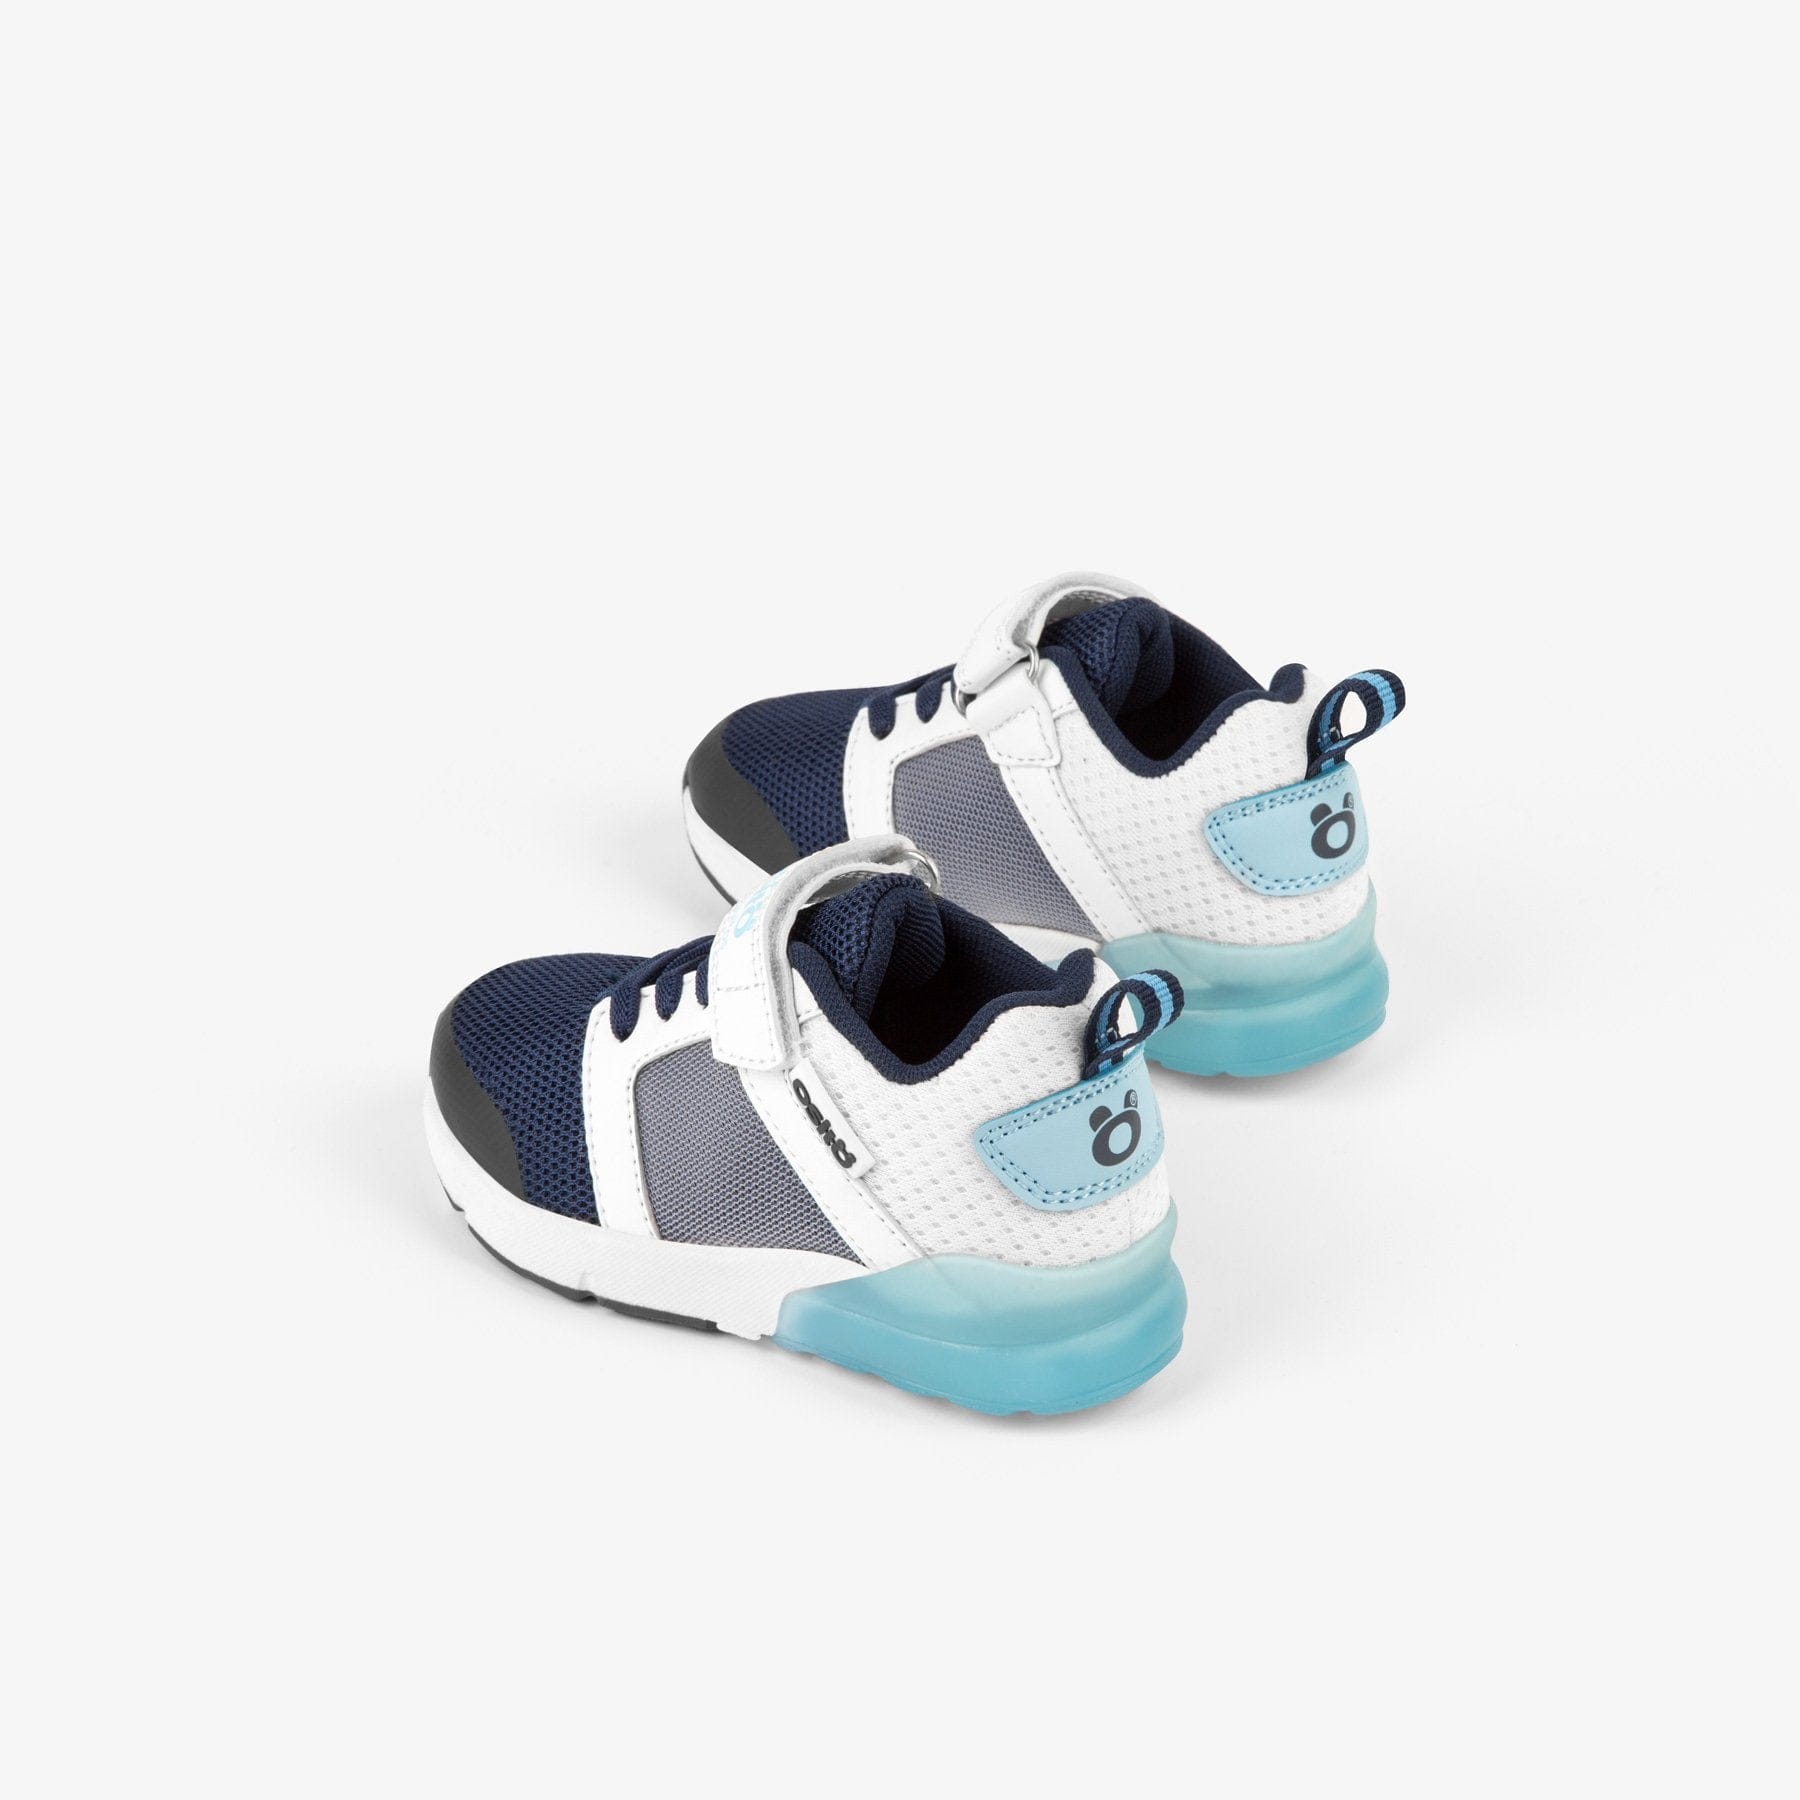 OSITO Shoes Baby's Navy Sneakers with Lights